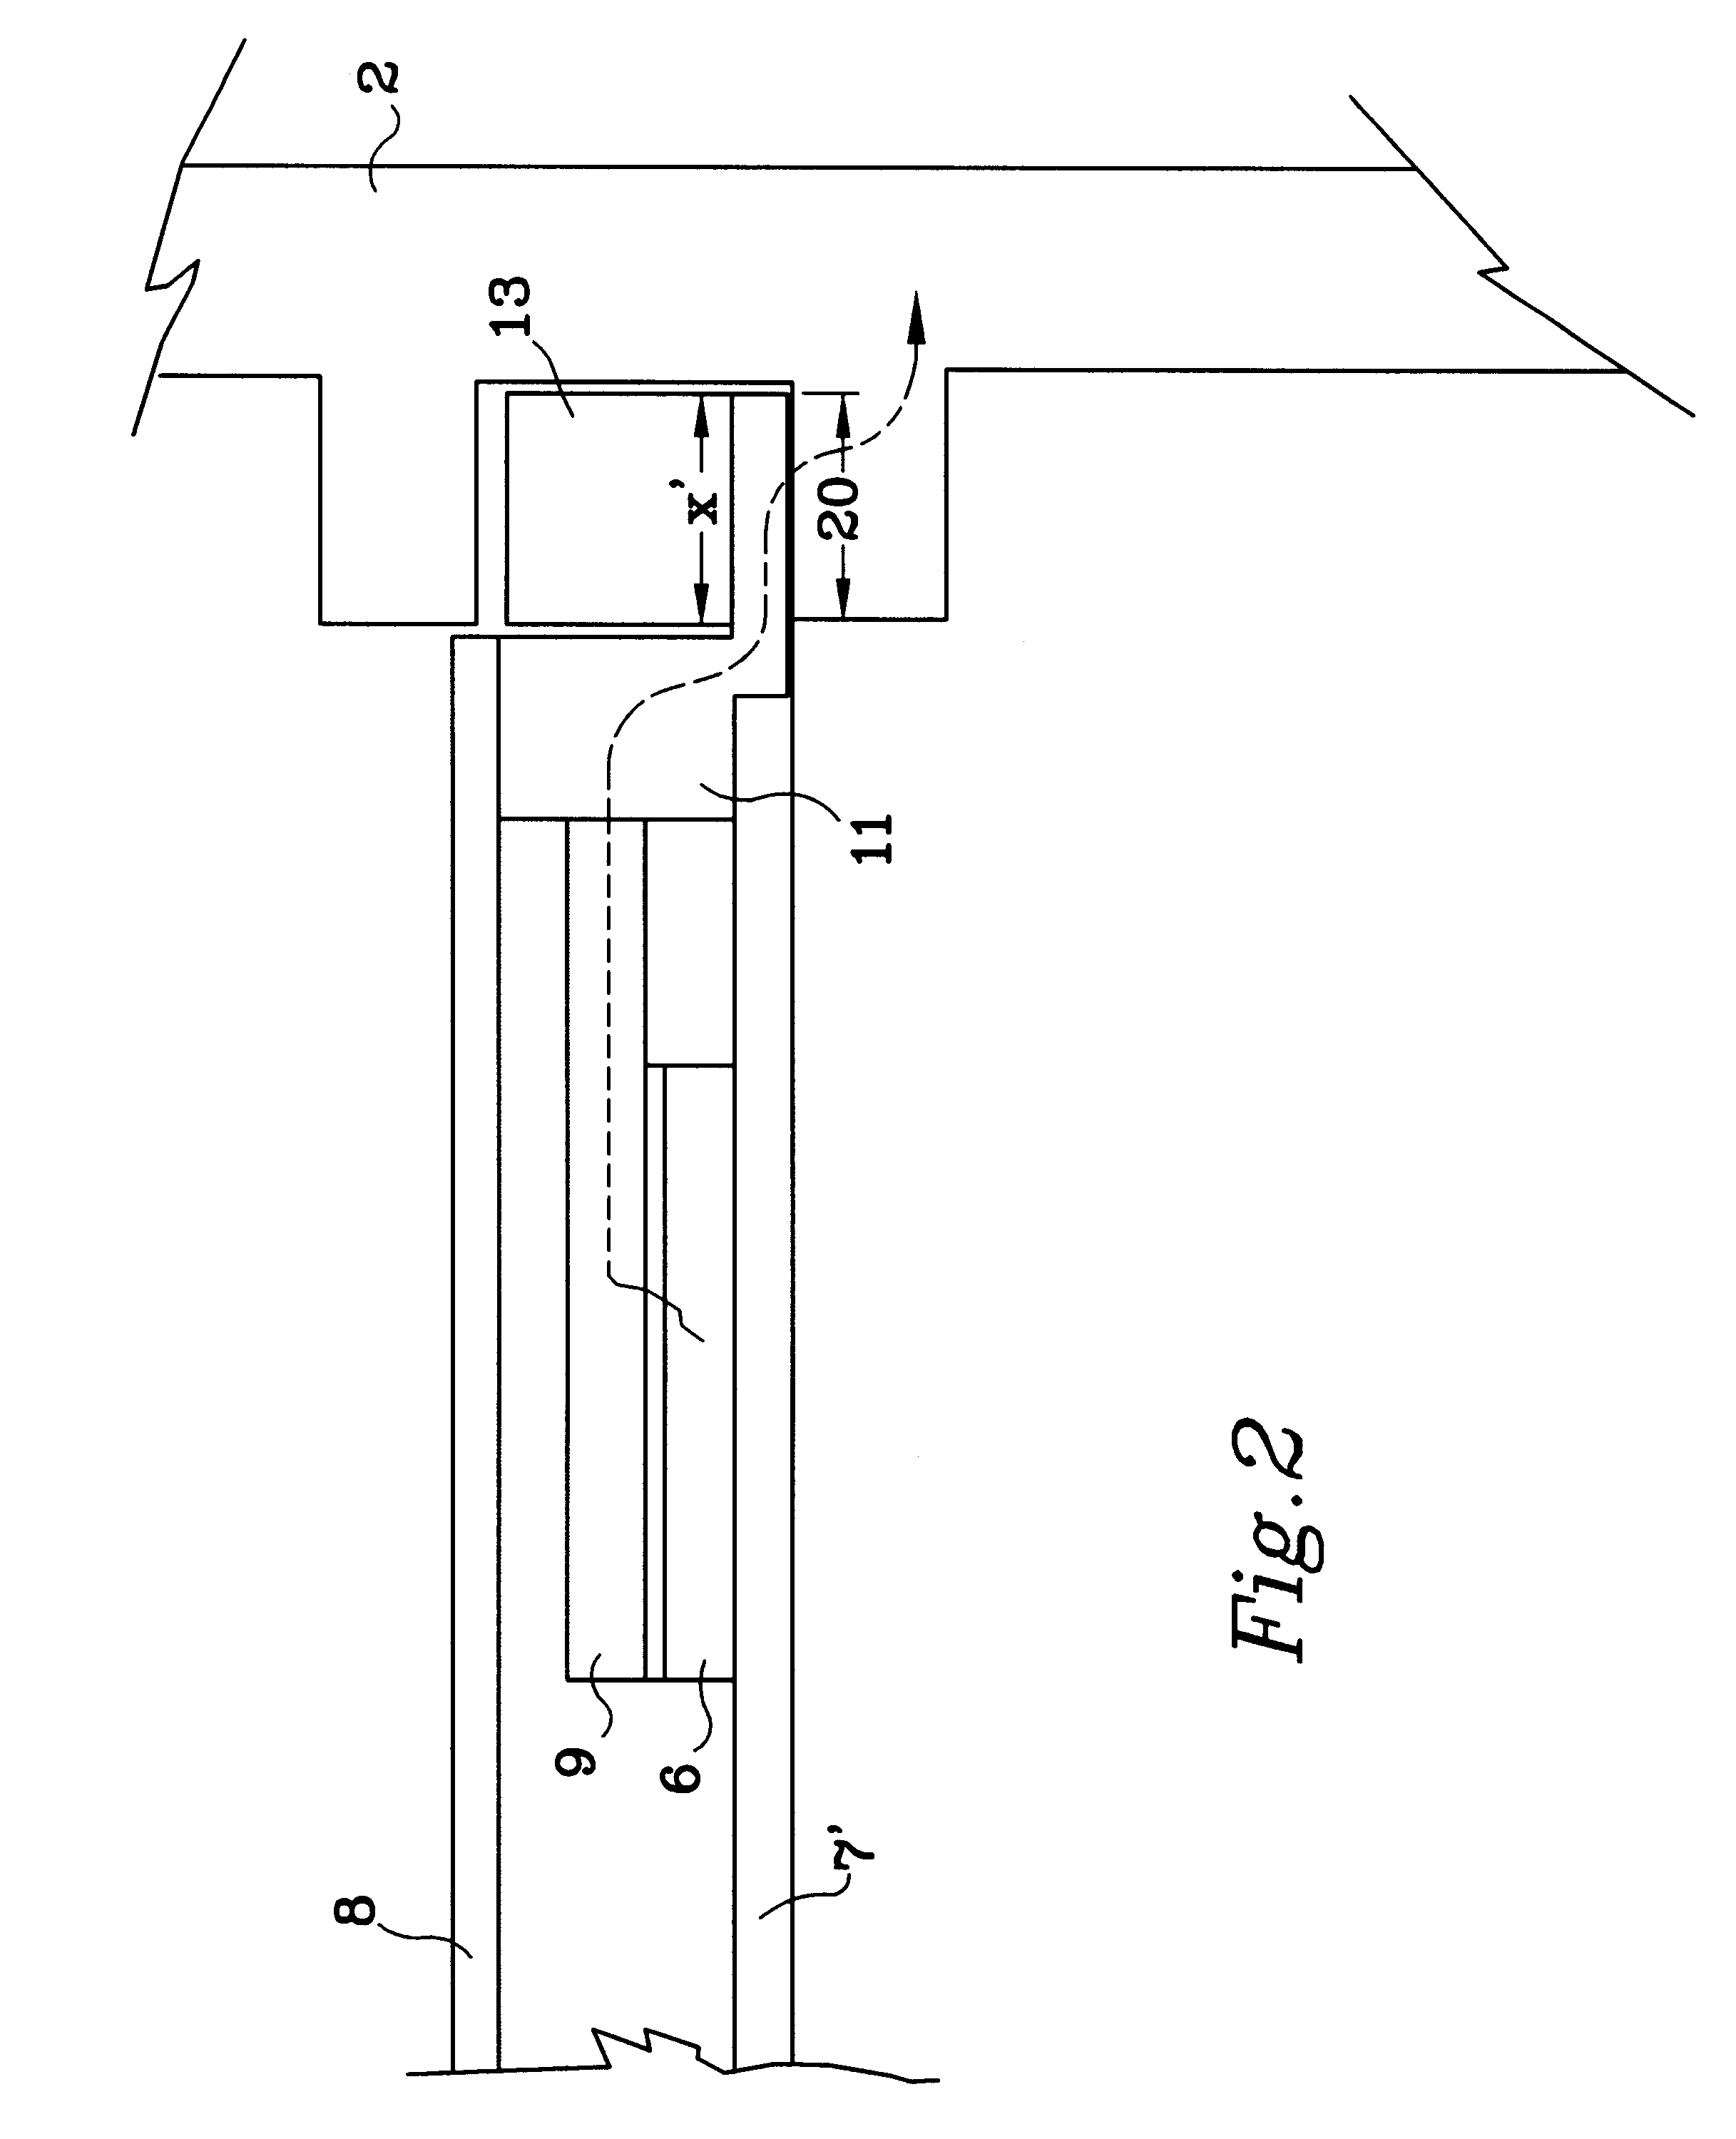 Adapter kit to allow extended width wedgelock for use in a circuit card module